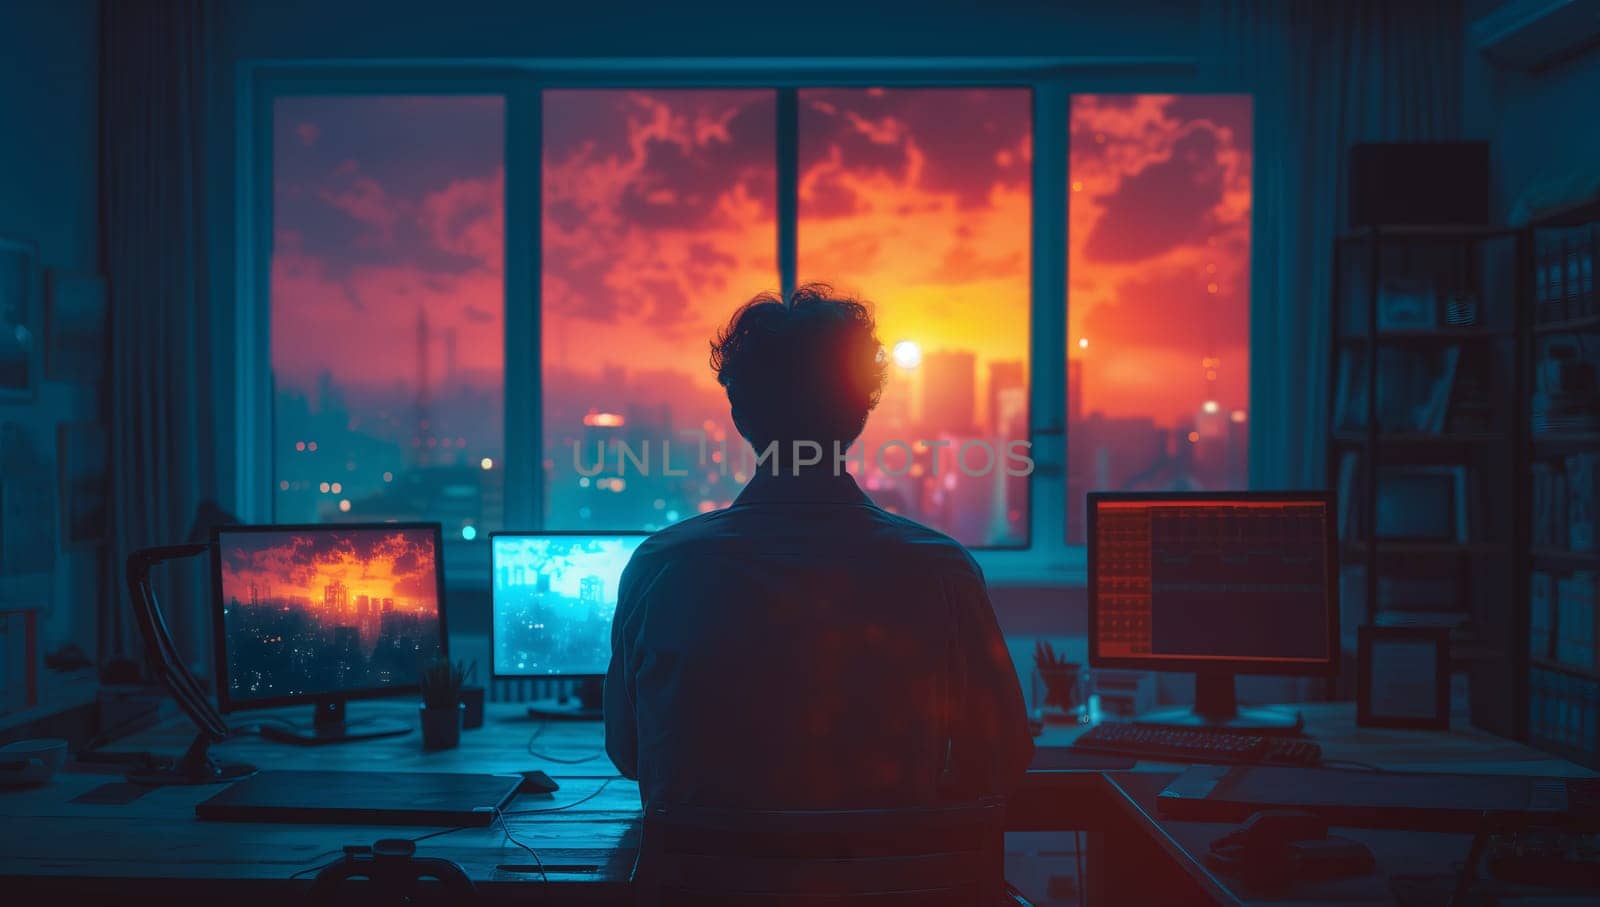 a man is sitting in front of a computer in a dark room by richwolf